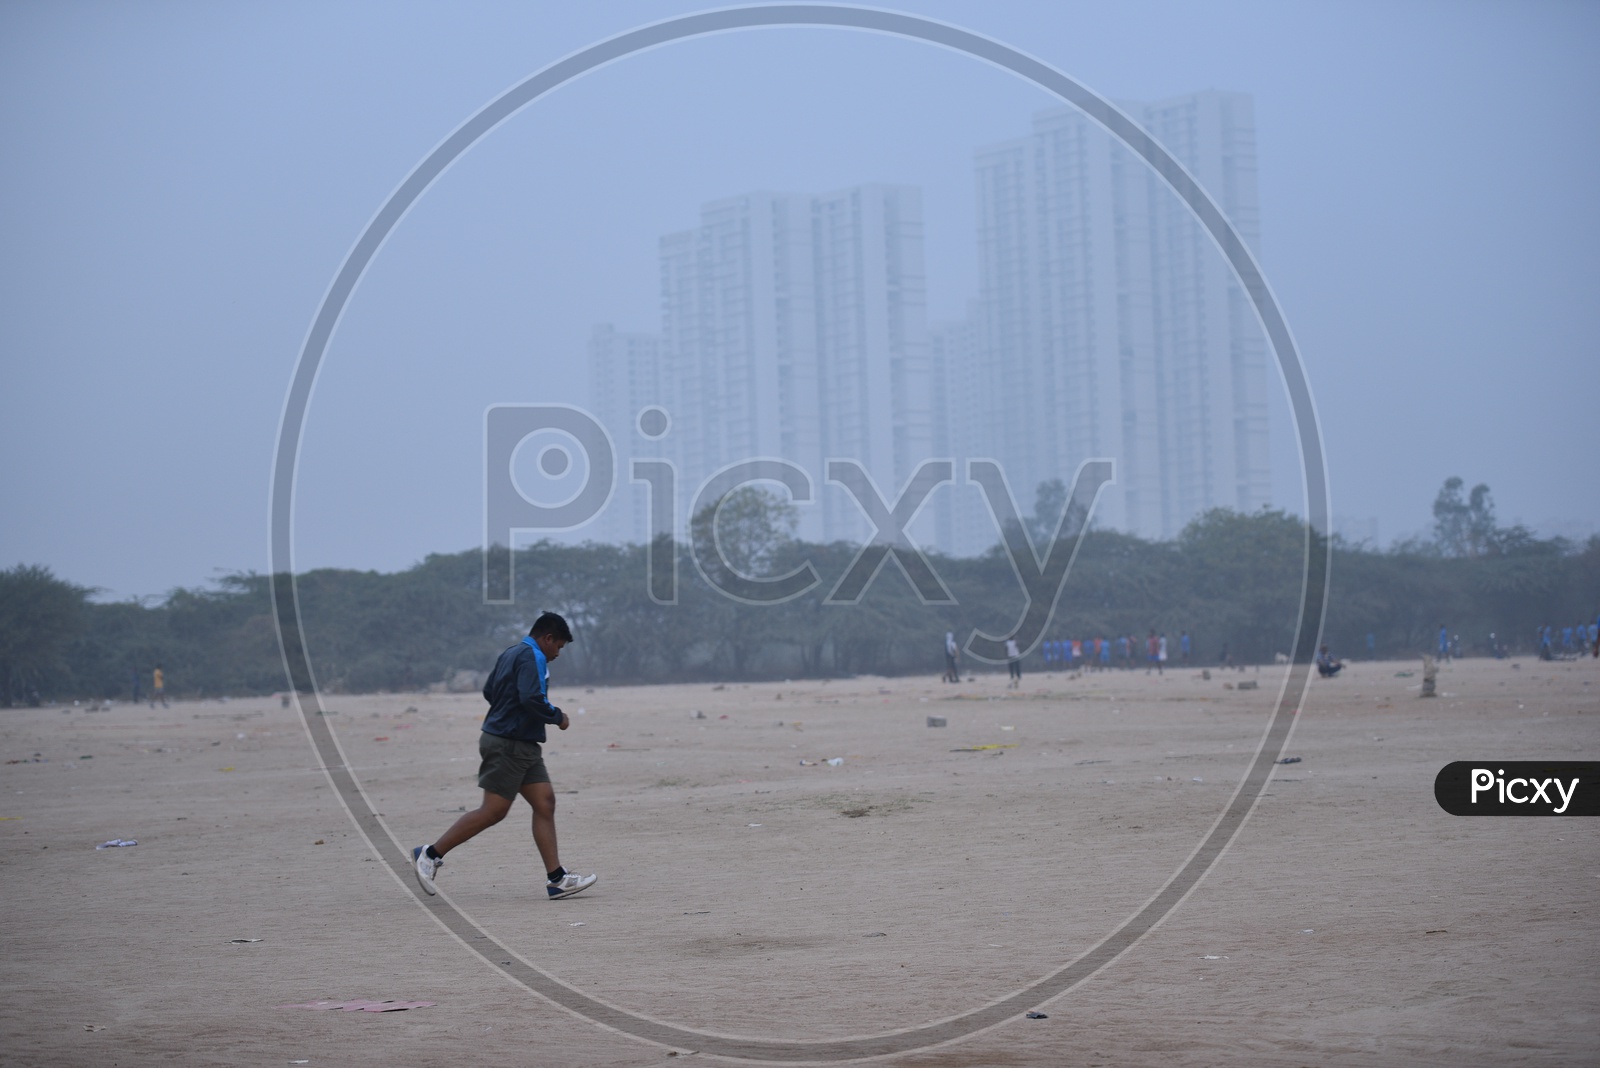 A man jogging in grounds as a part of morning exercise.